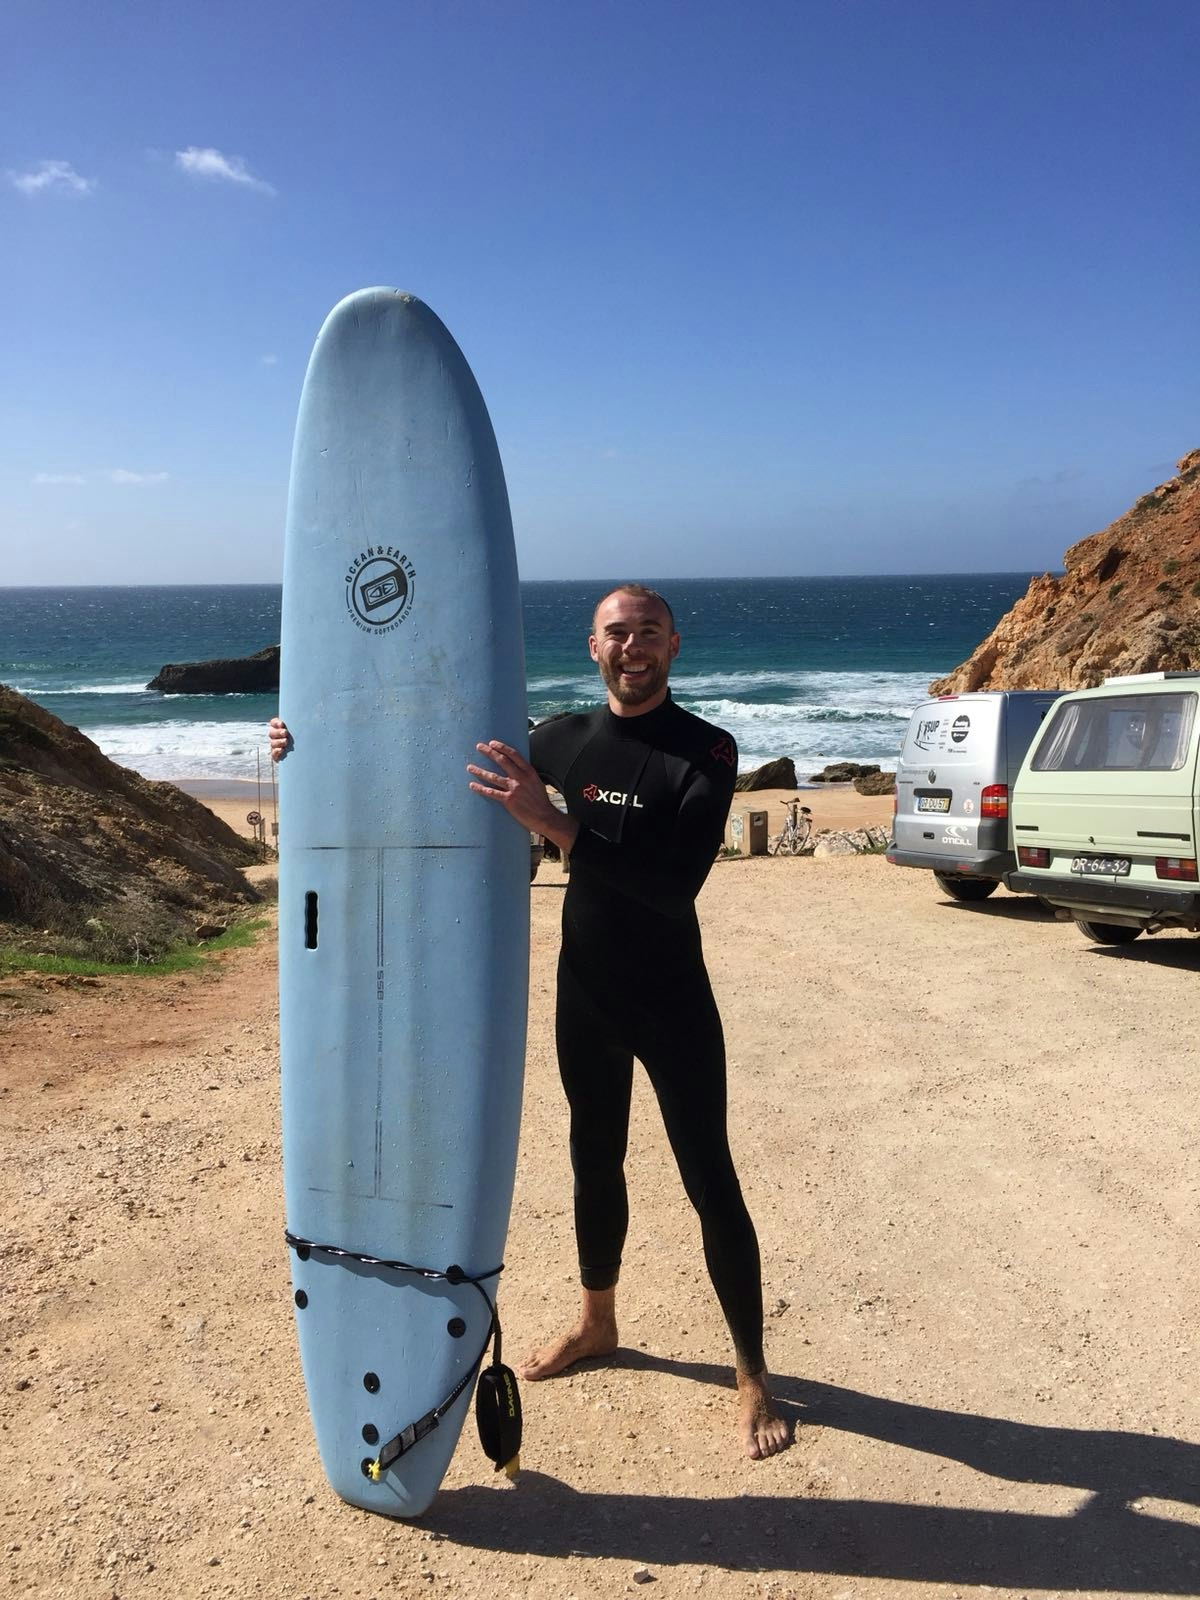 Writer Tom wears a wetsuit and holds a surfboard, with rocky cliffs, the beach and Atlantic Ocean behind him. 